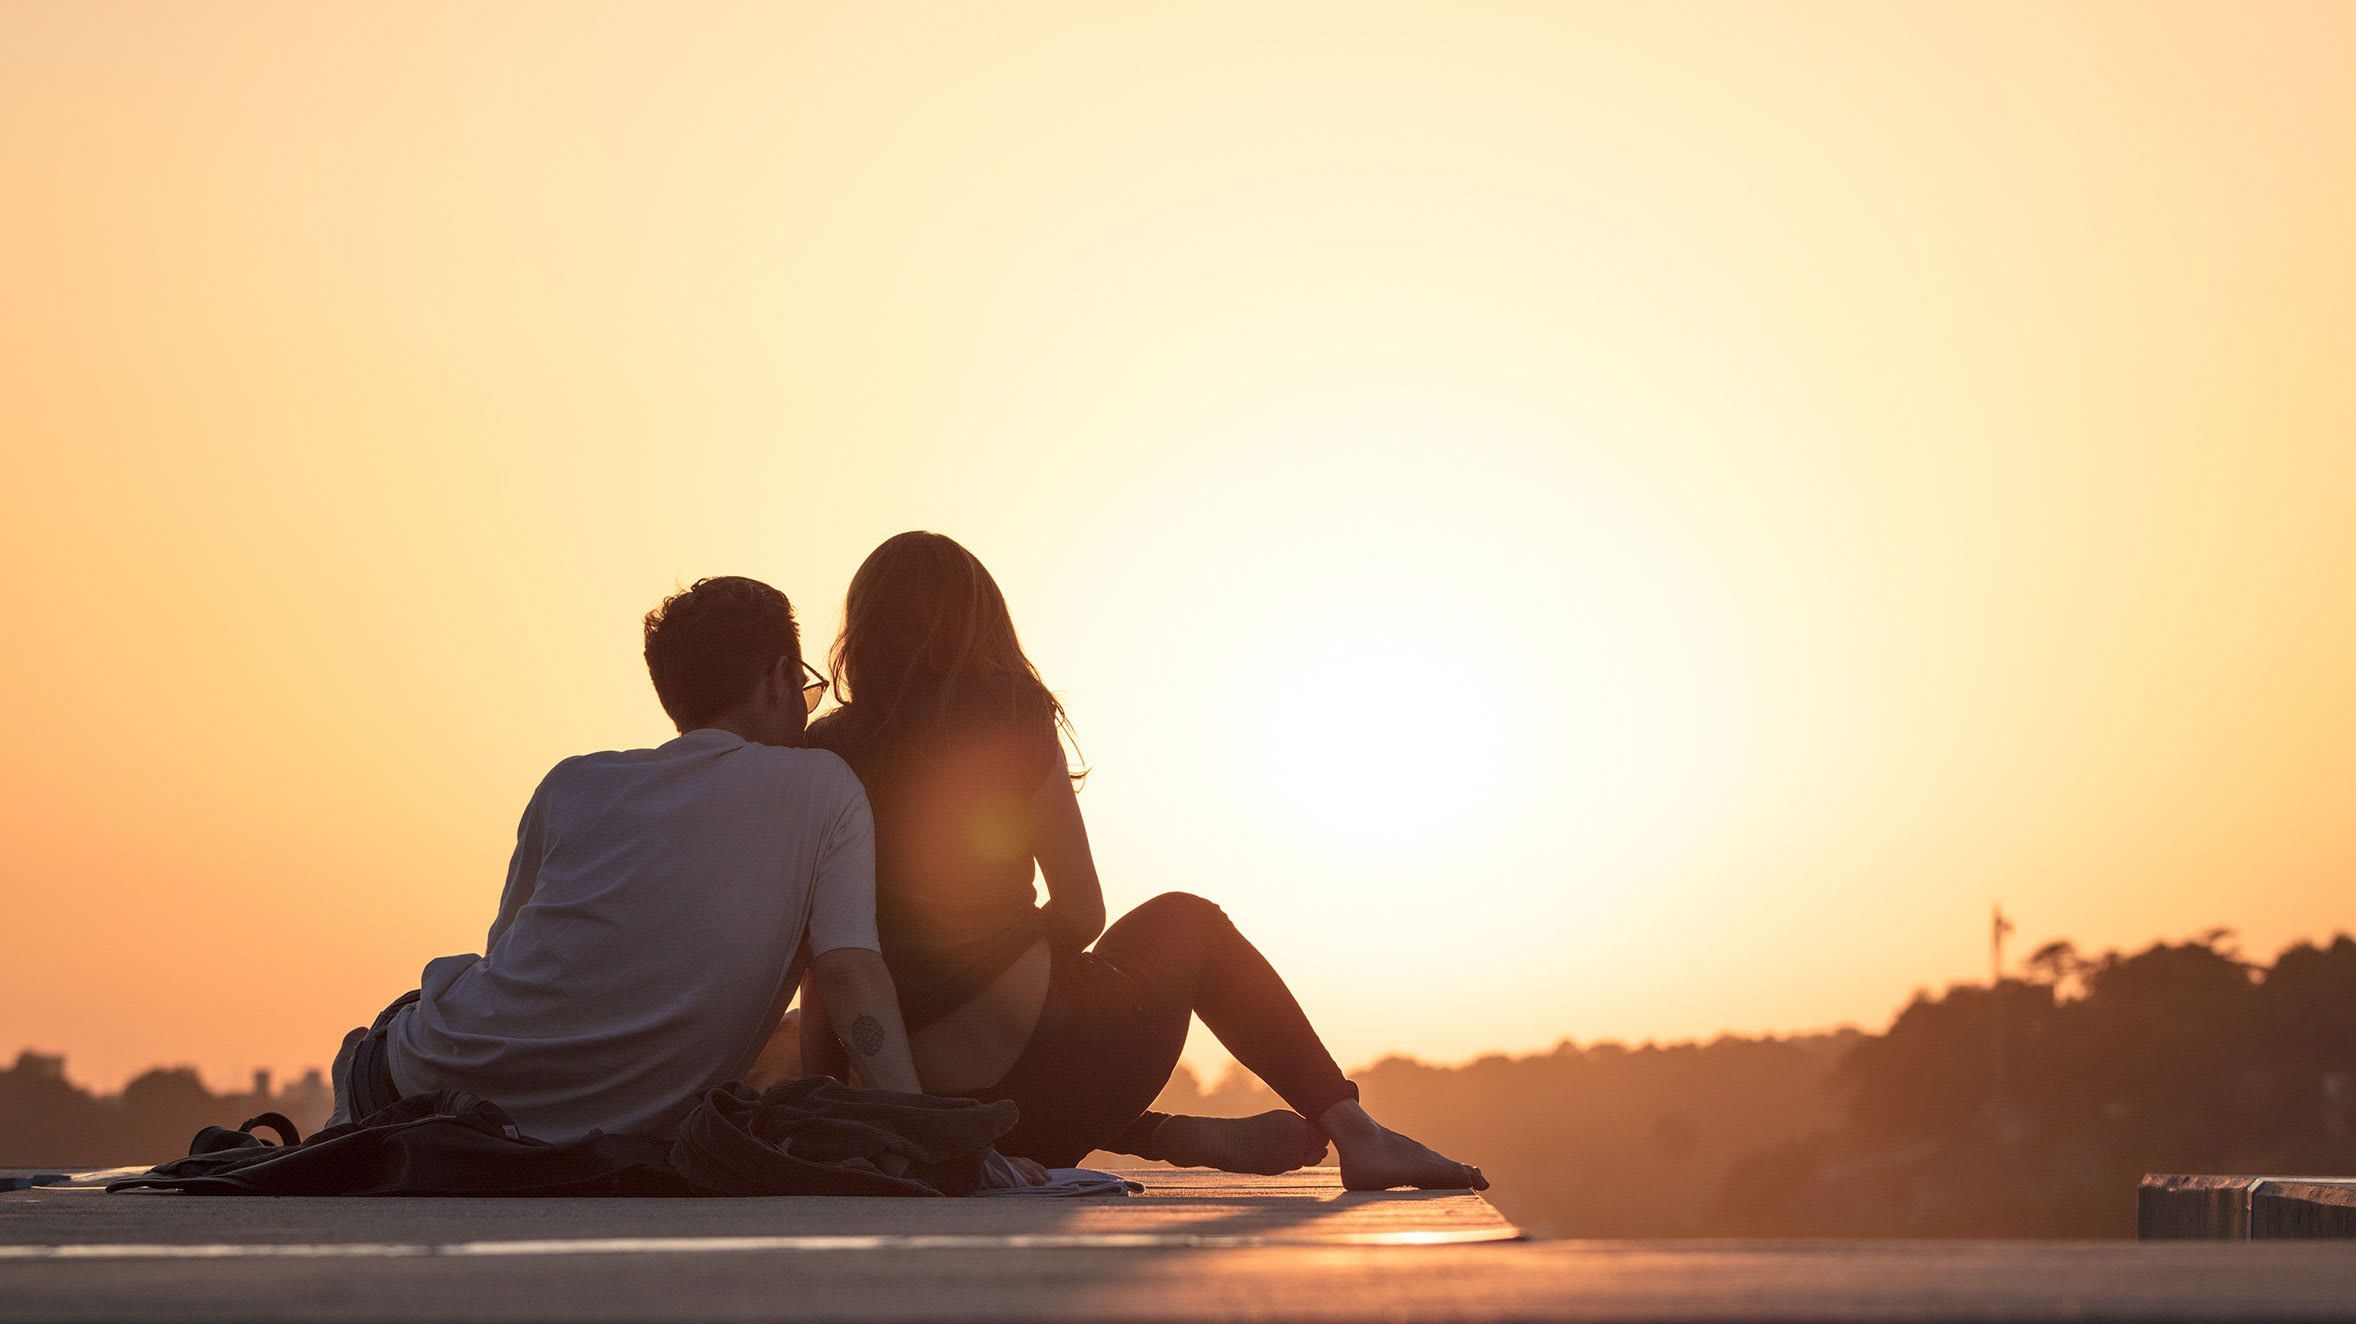 Couple sitting while viewing a romantic sunset